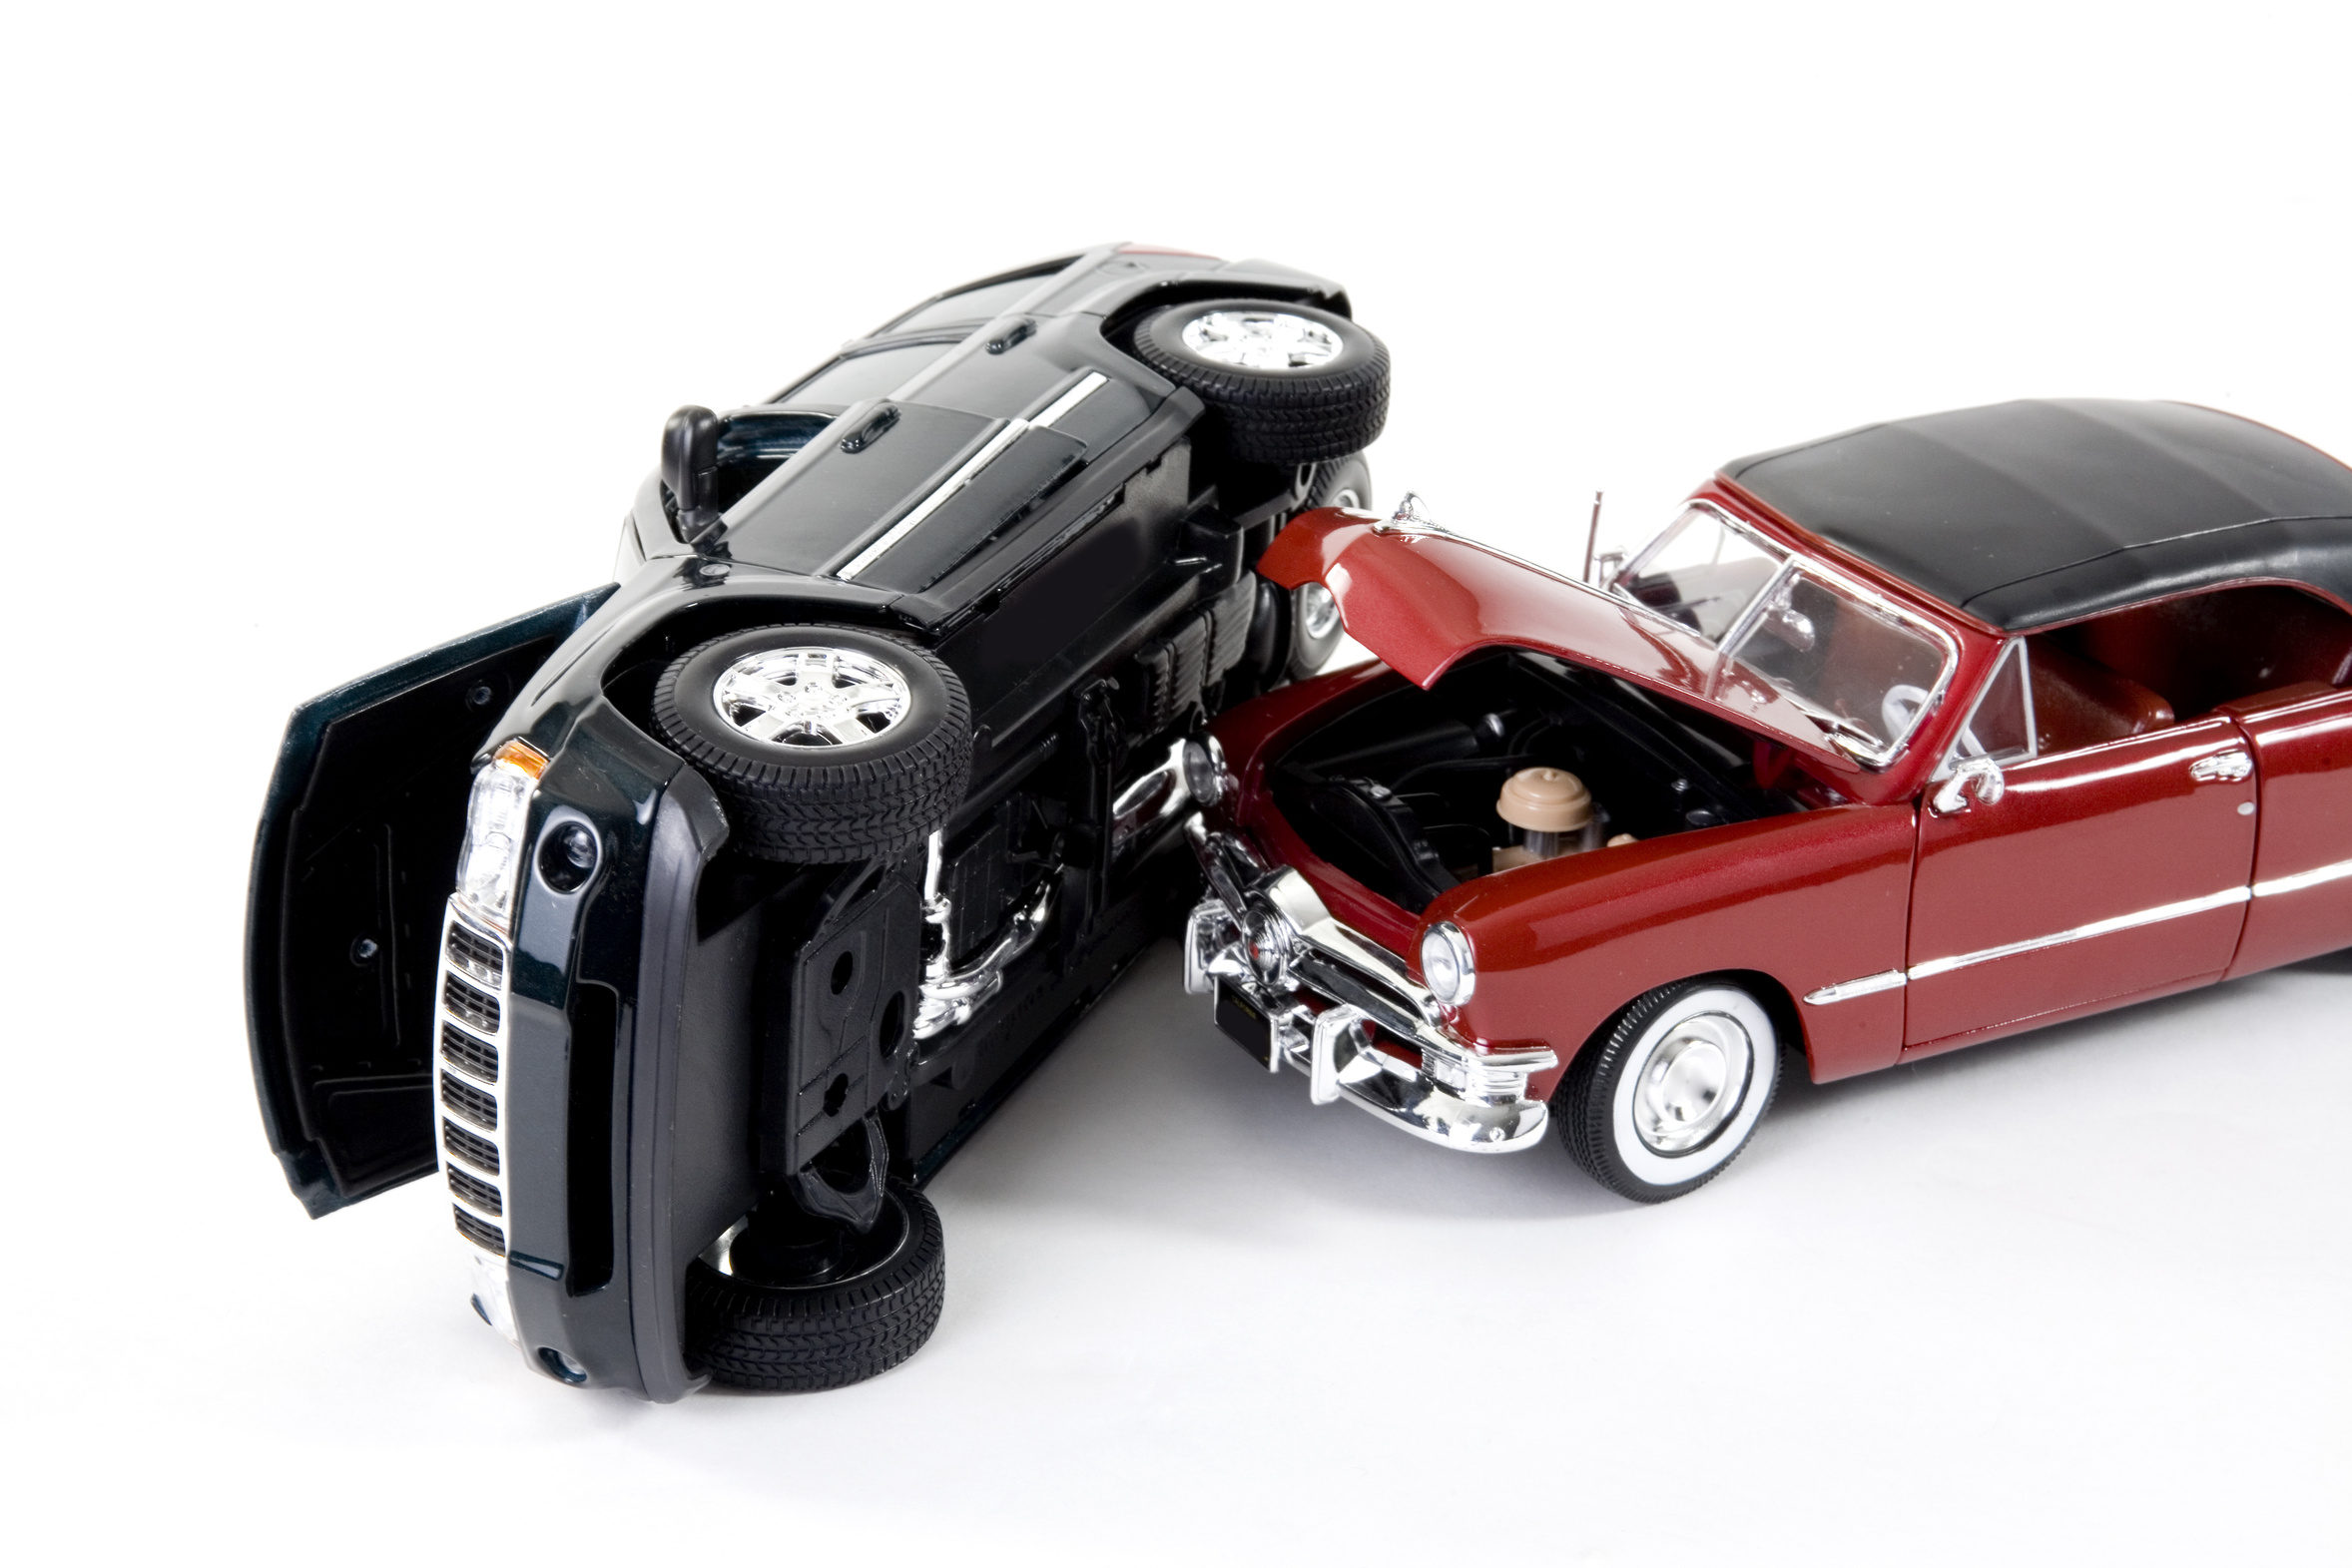 What Affects My Car Insurance Rate?